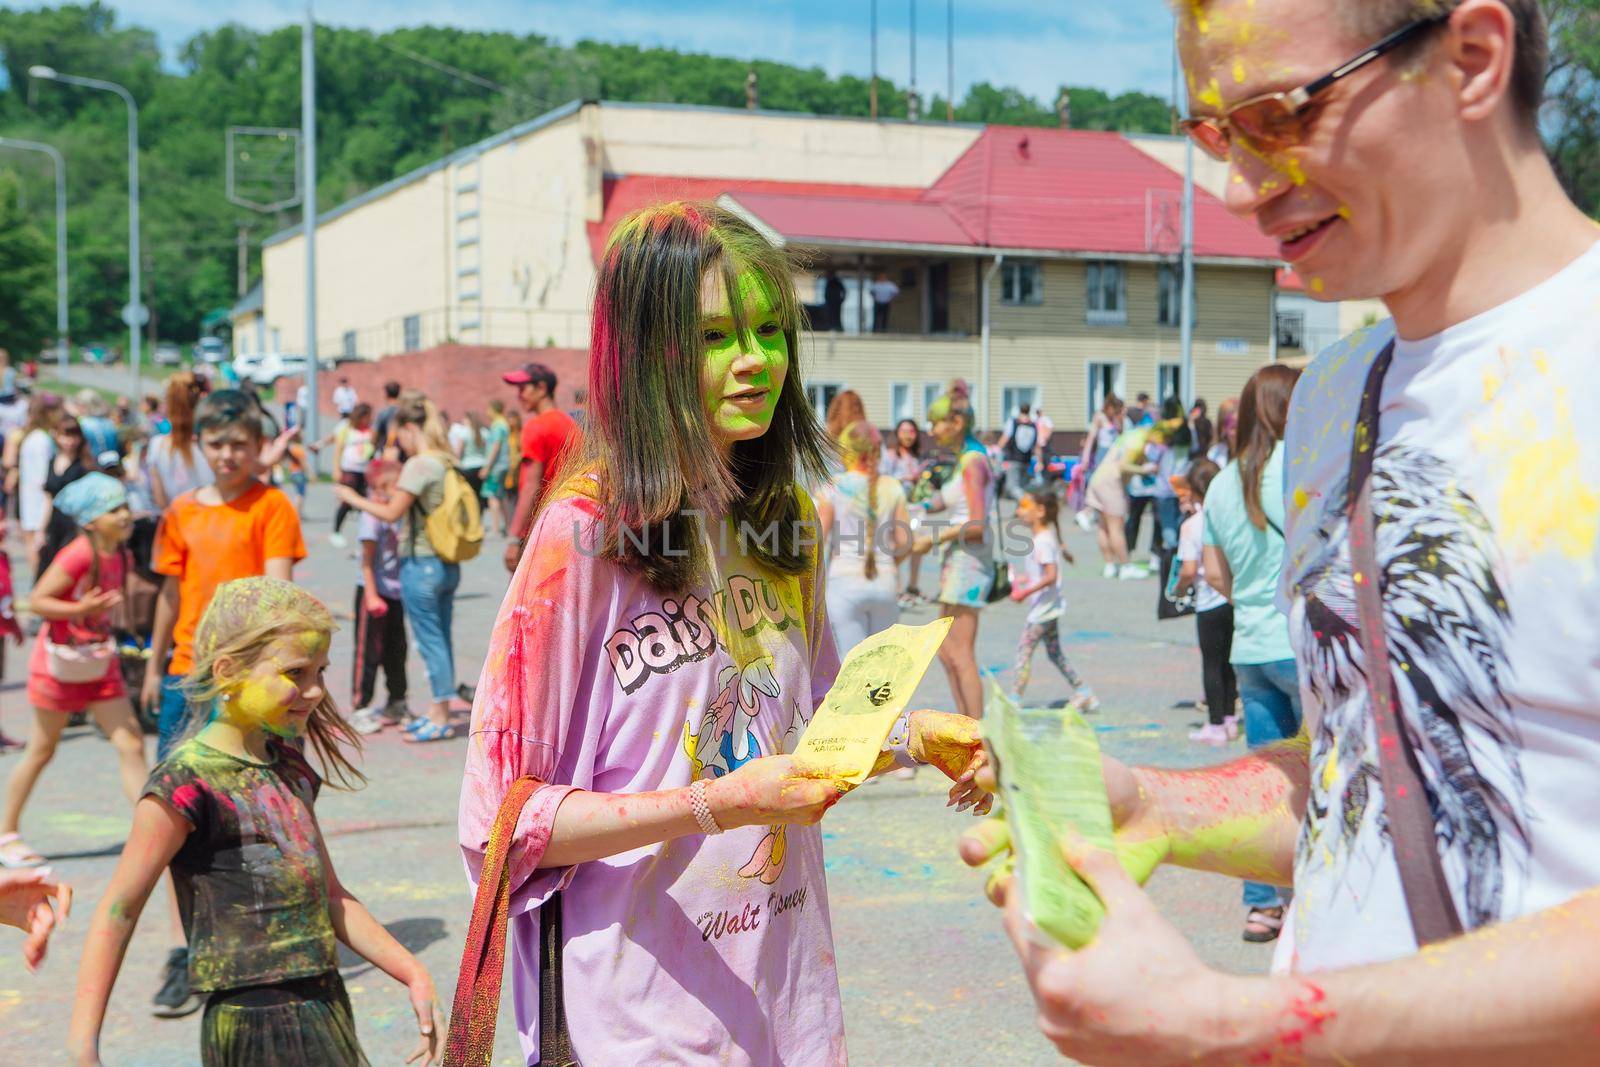 Novokuznetsk, Kemerovo region, Russia - June 12, 2022 :: Teenagers with colorful faces painted with holi powder having fun outdoors.